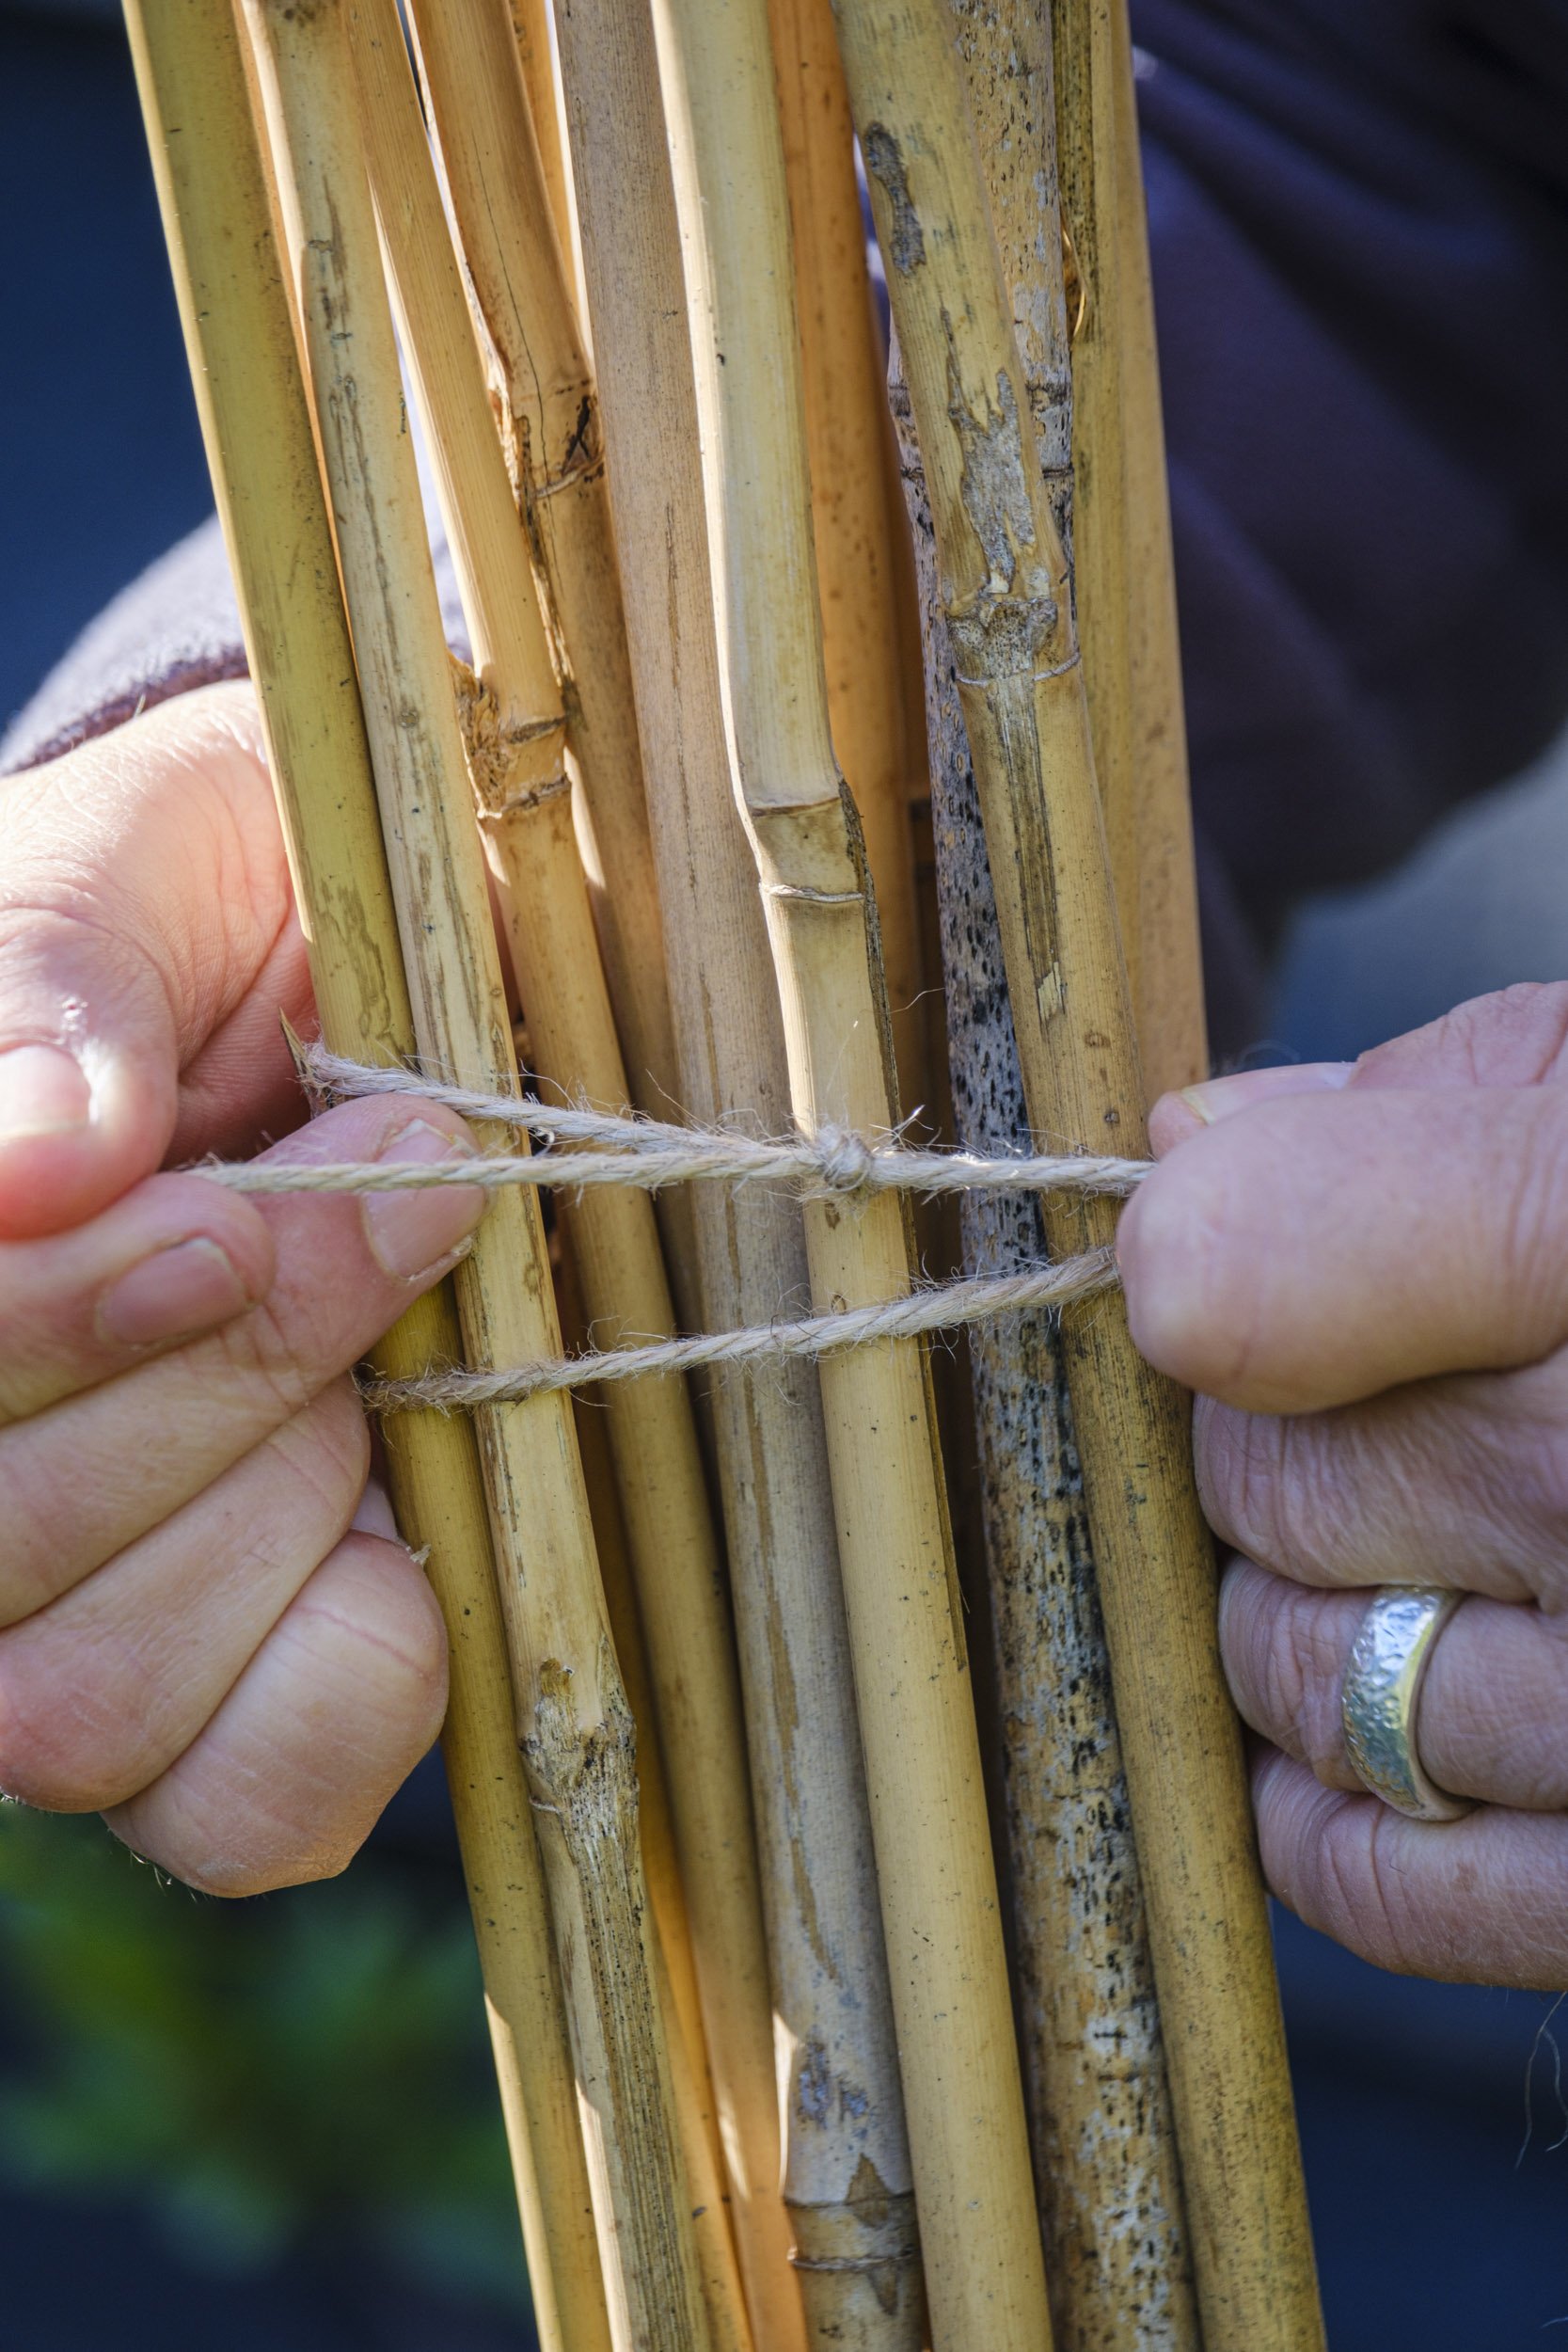 Tying up bamboo canes, winter, photography for Pimpernel Press